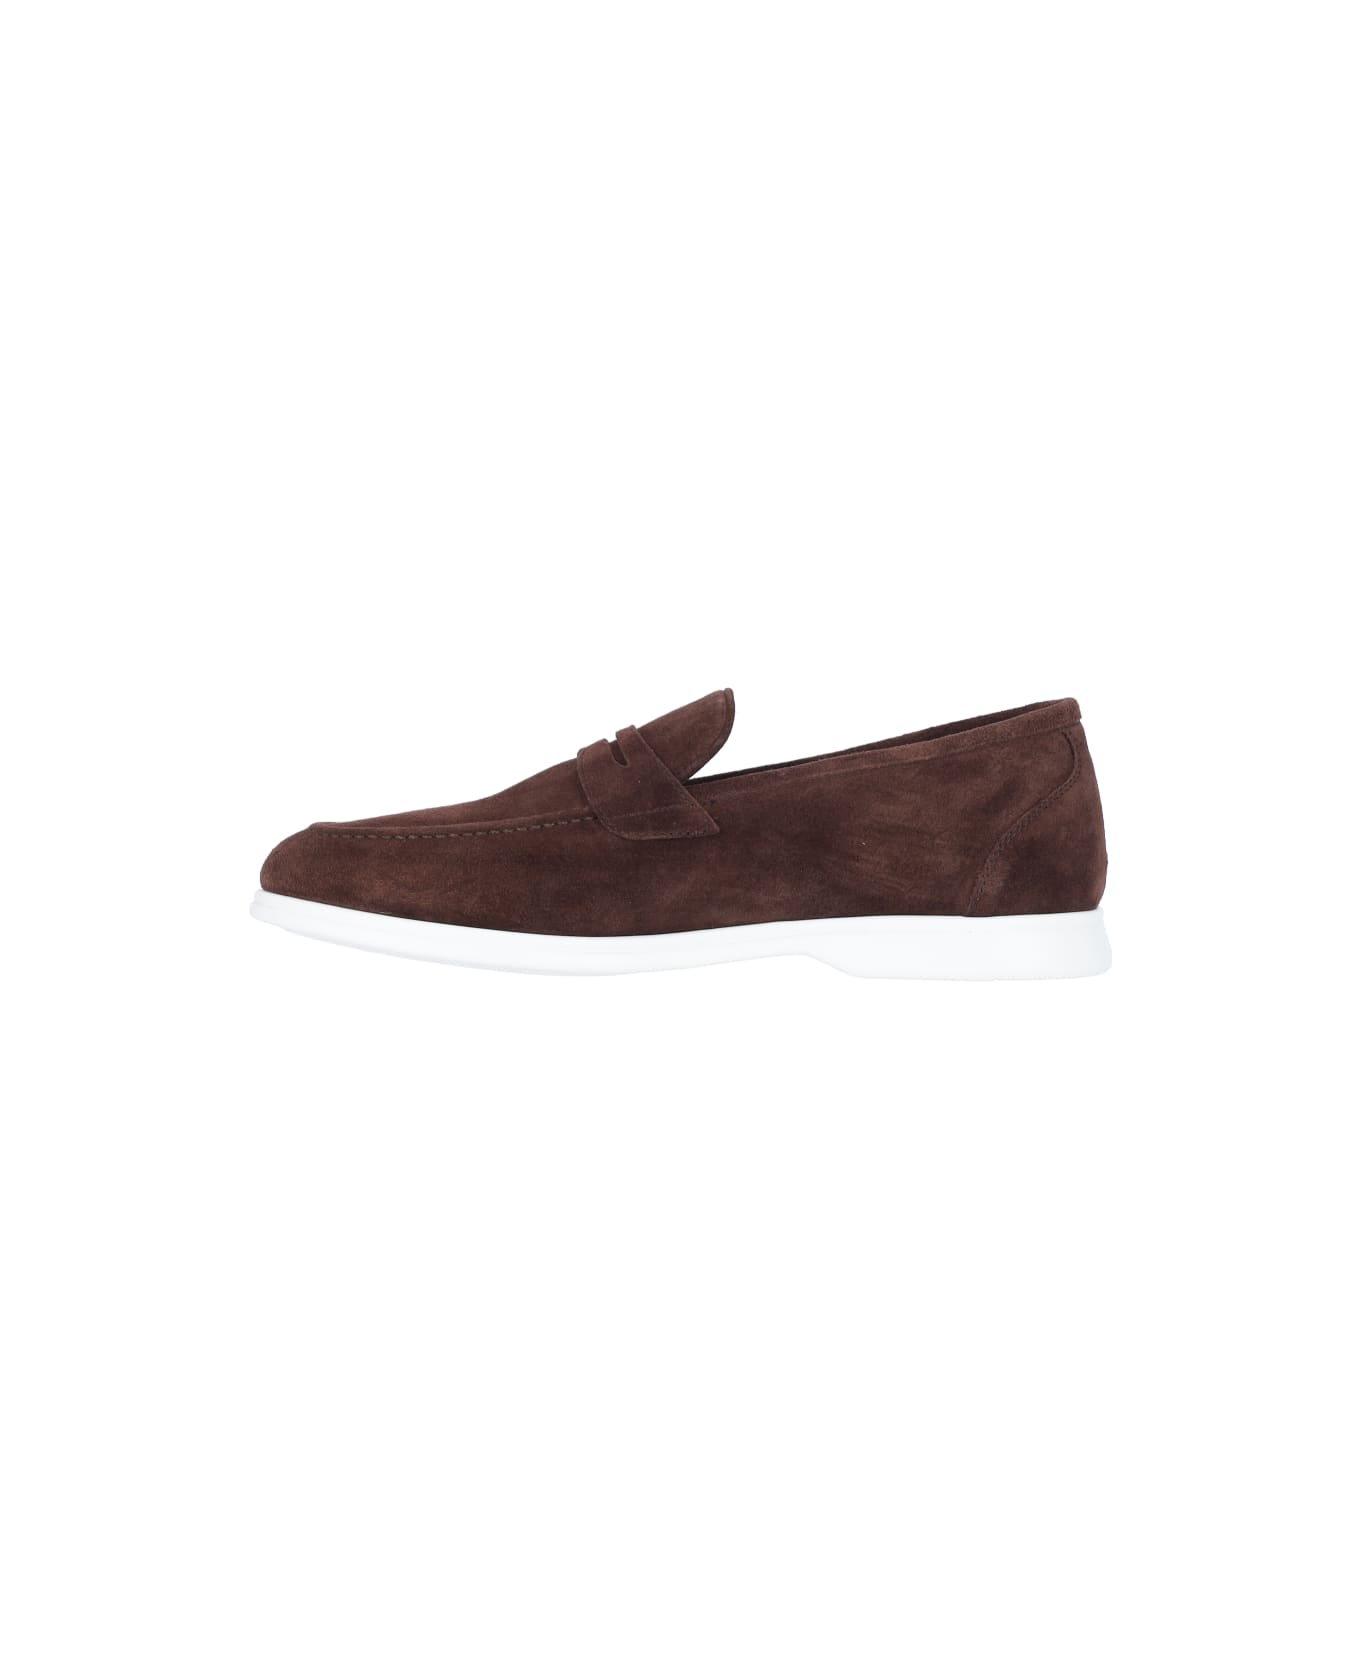 Kiton Suede Loafers - Brown